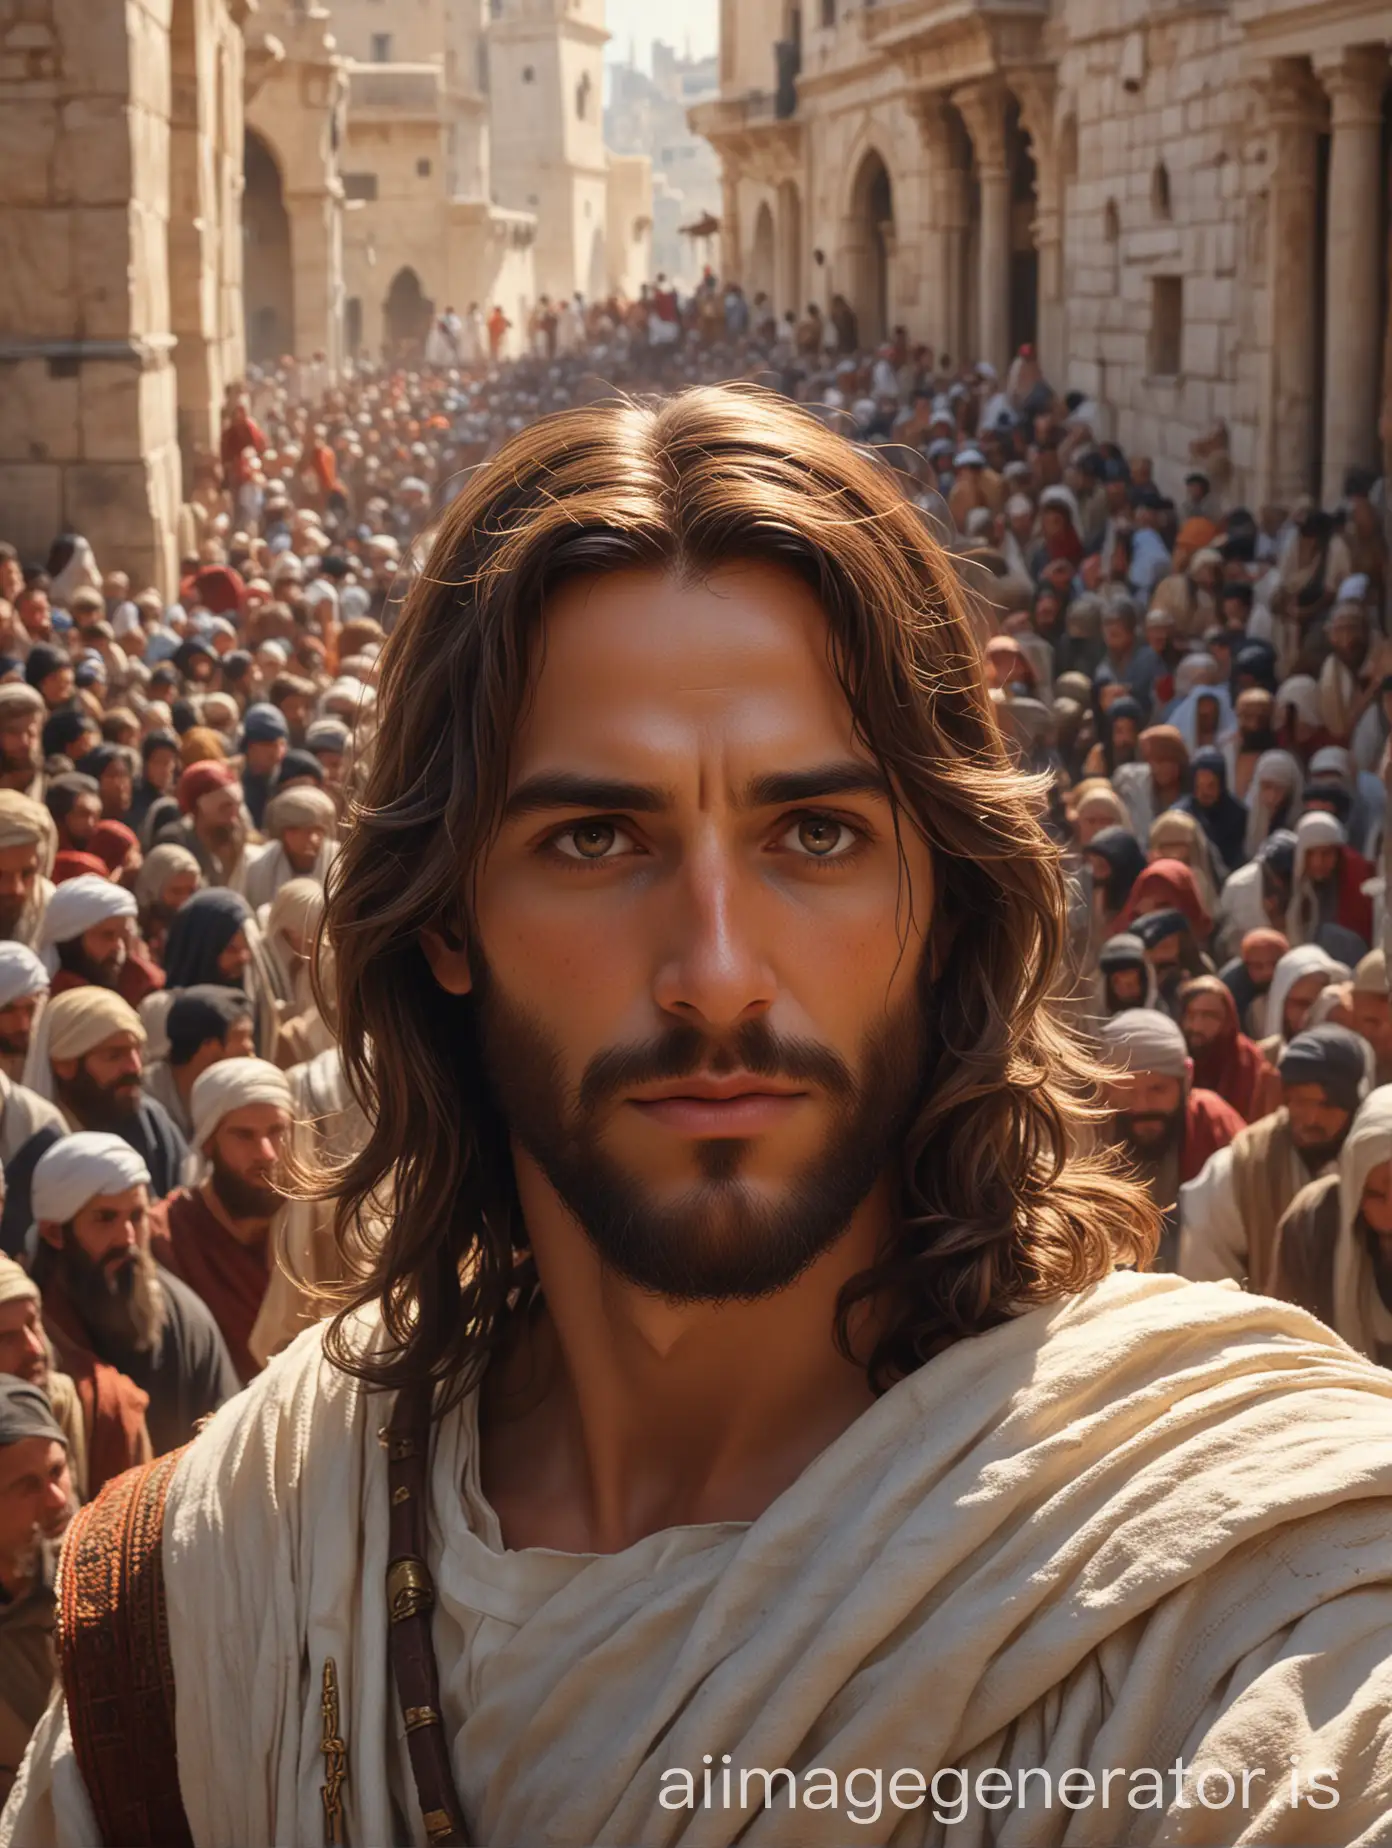 Epic-Fantasy-Art-Jesus-Surrounded-by-People-on-the-Temple-Mount